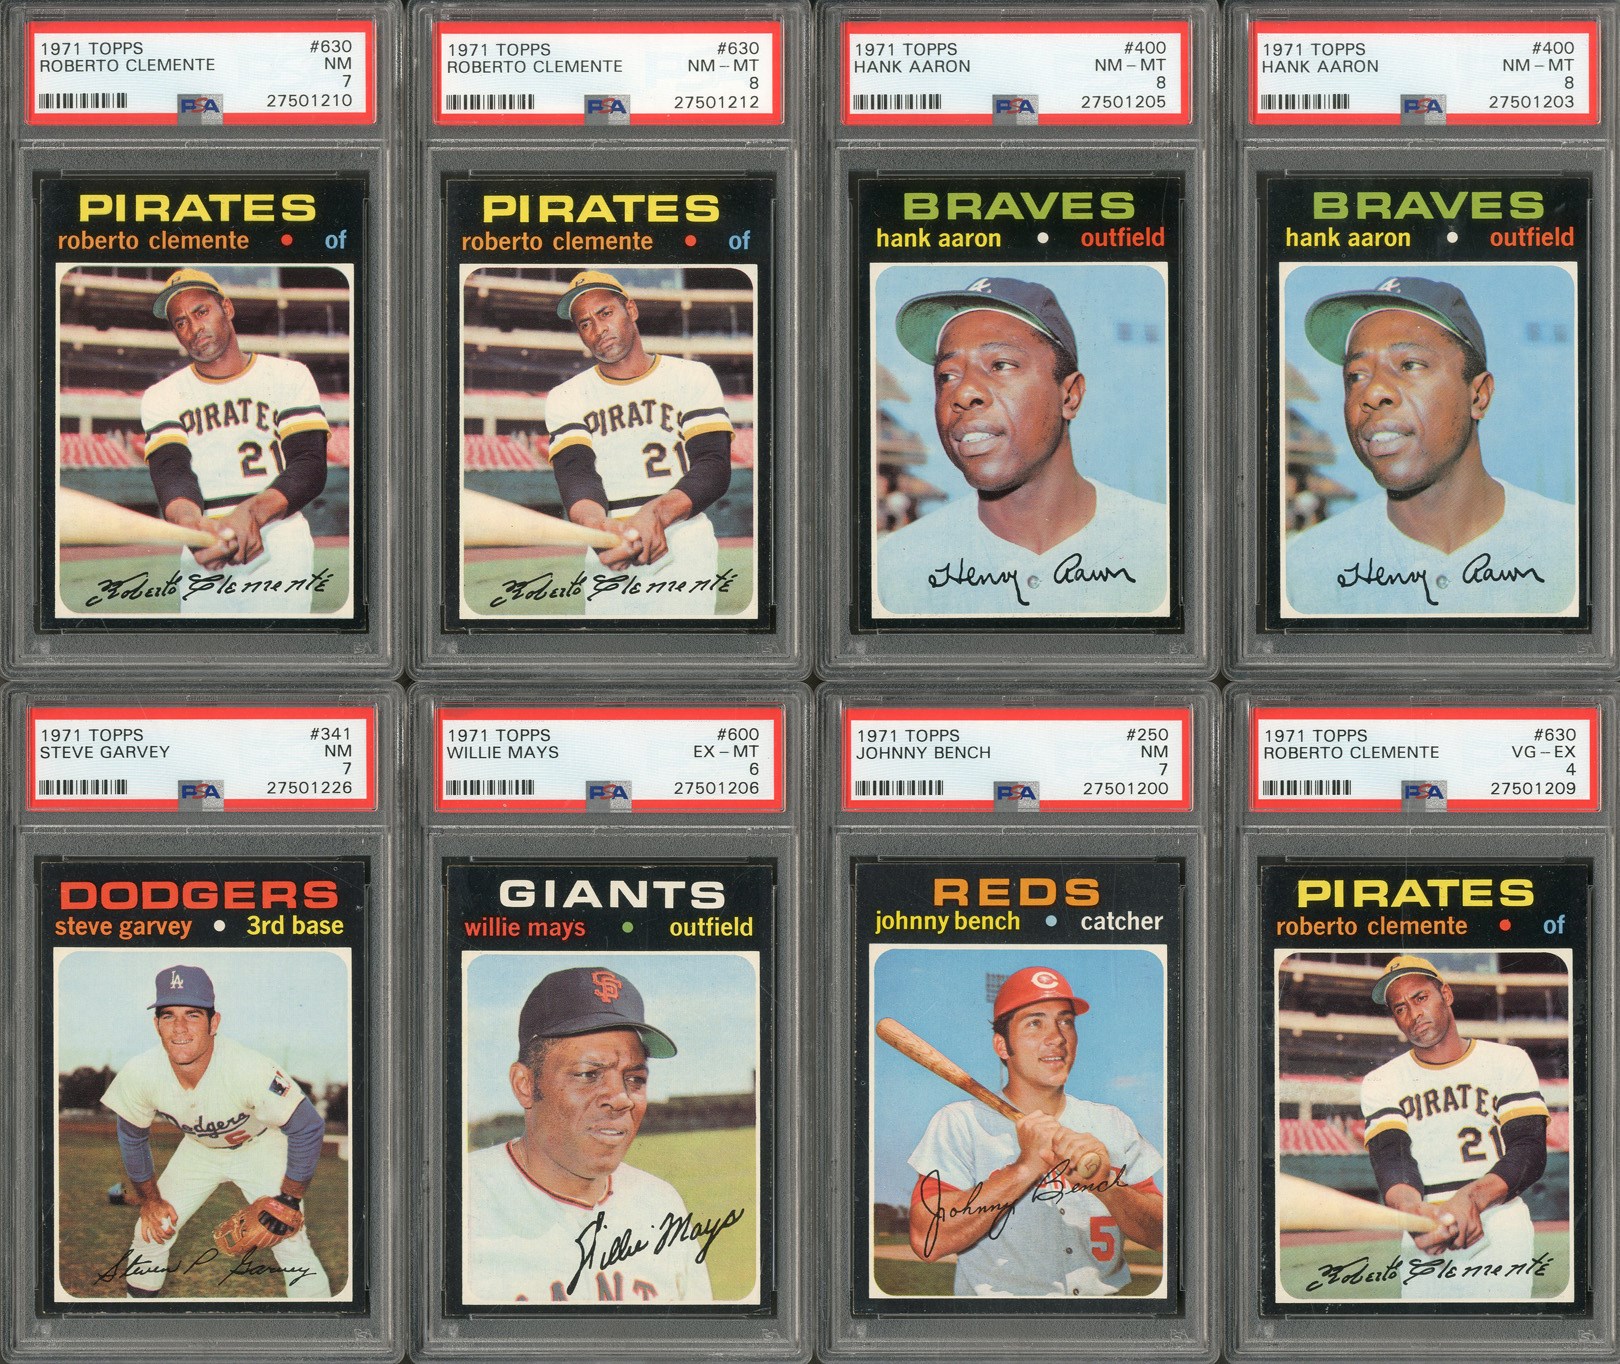 Baseball and Trading Cards - 1971 Topps PSA Graded Collection (8 Cards with PSA 8 Clemente)